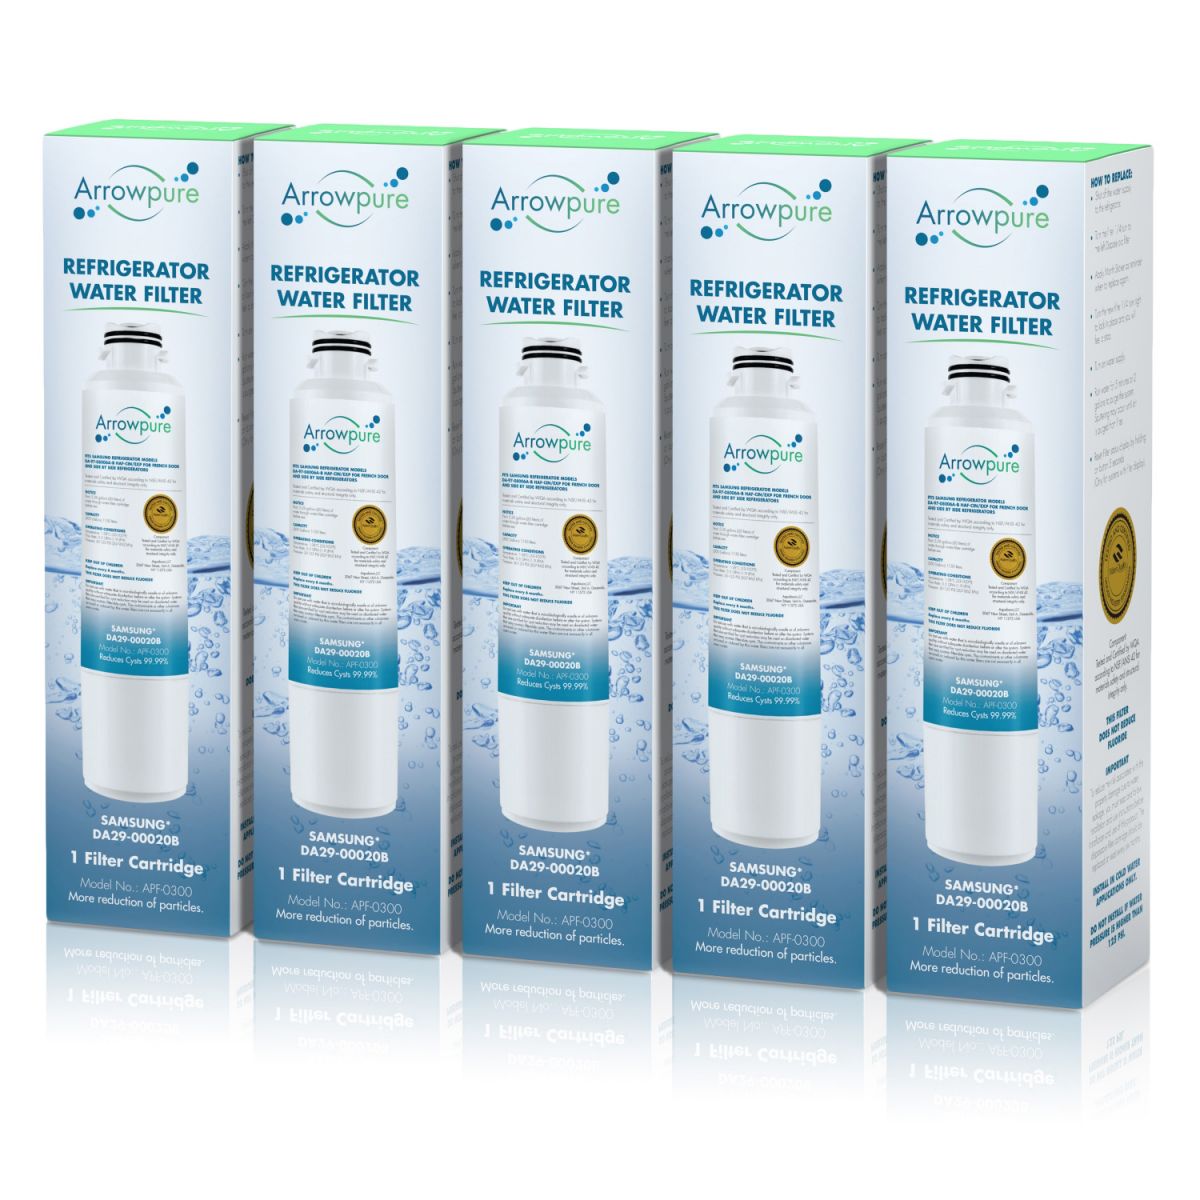 5 Pack Of Arrowpure Refrigerator Water Filter Replacement APF-0300x5